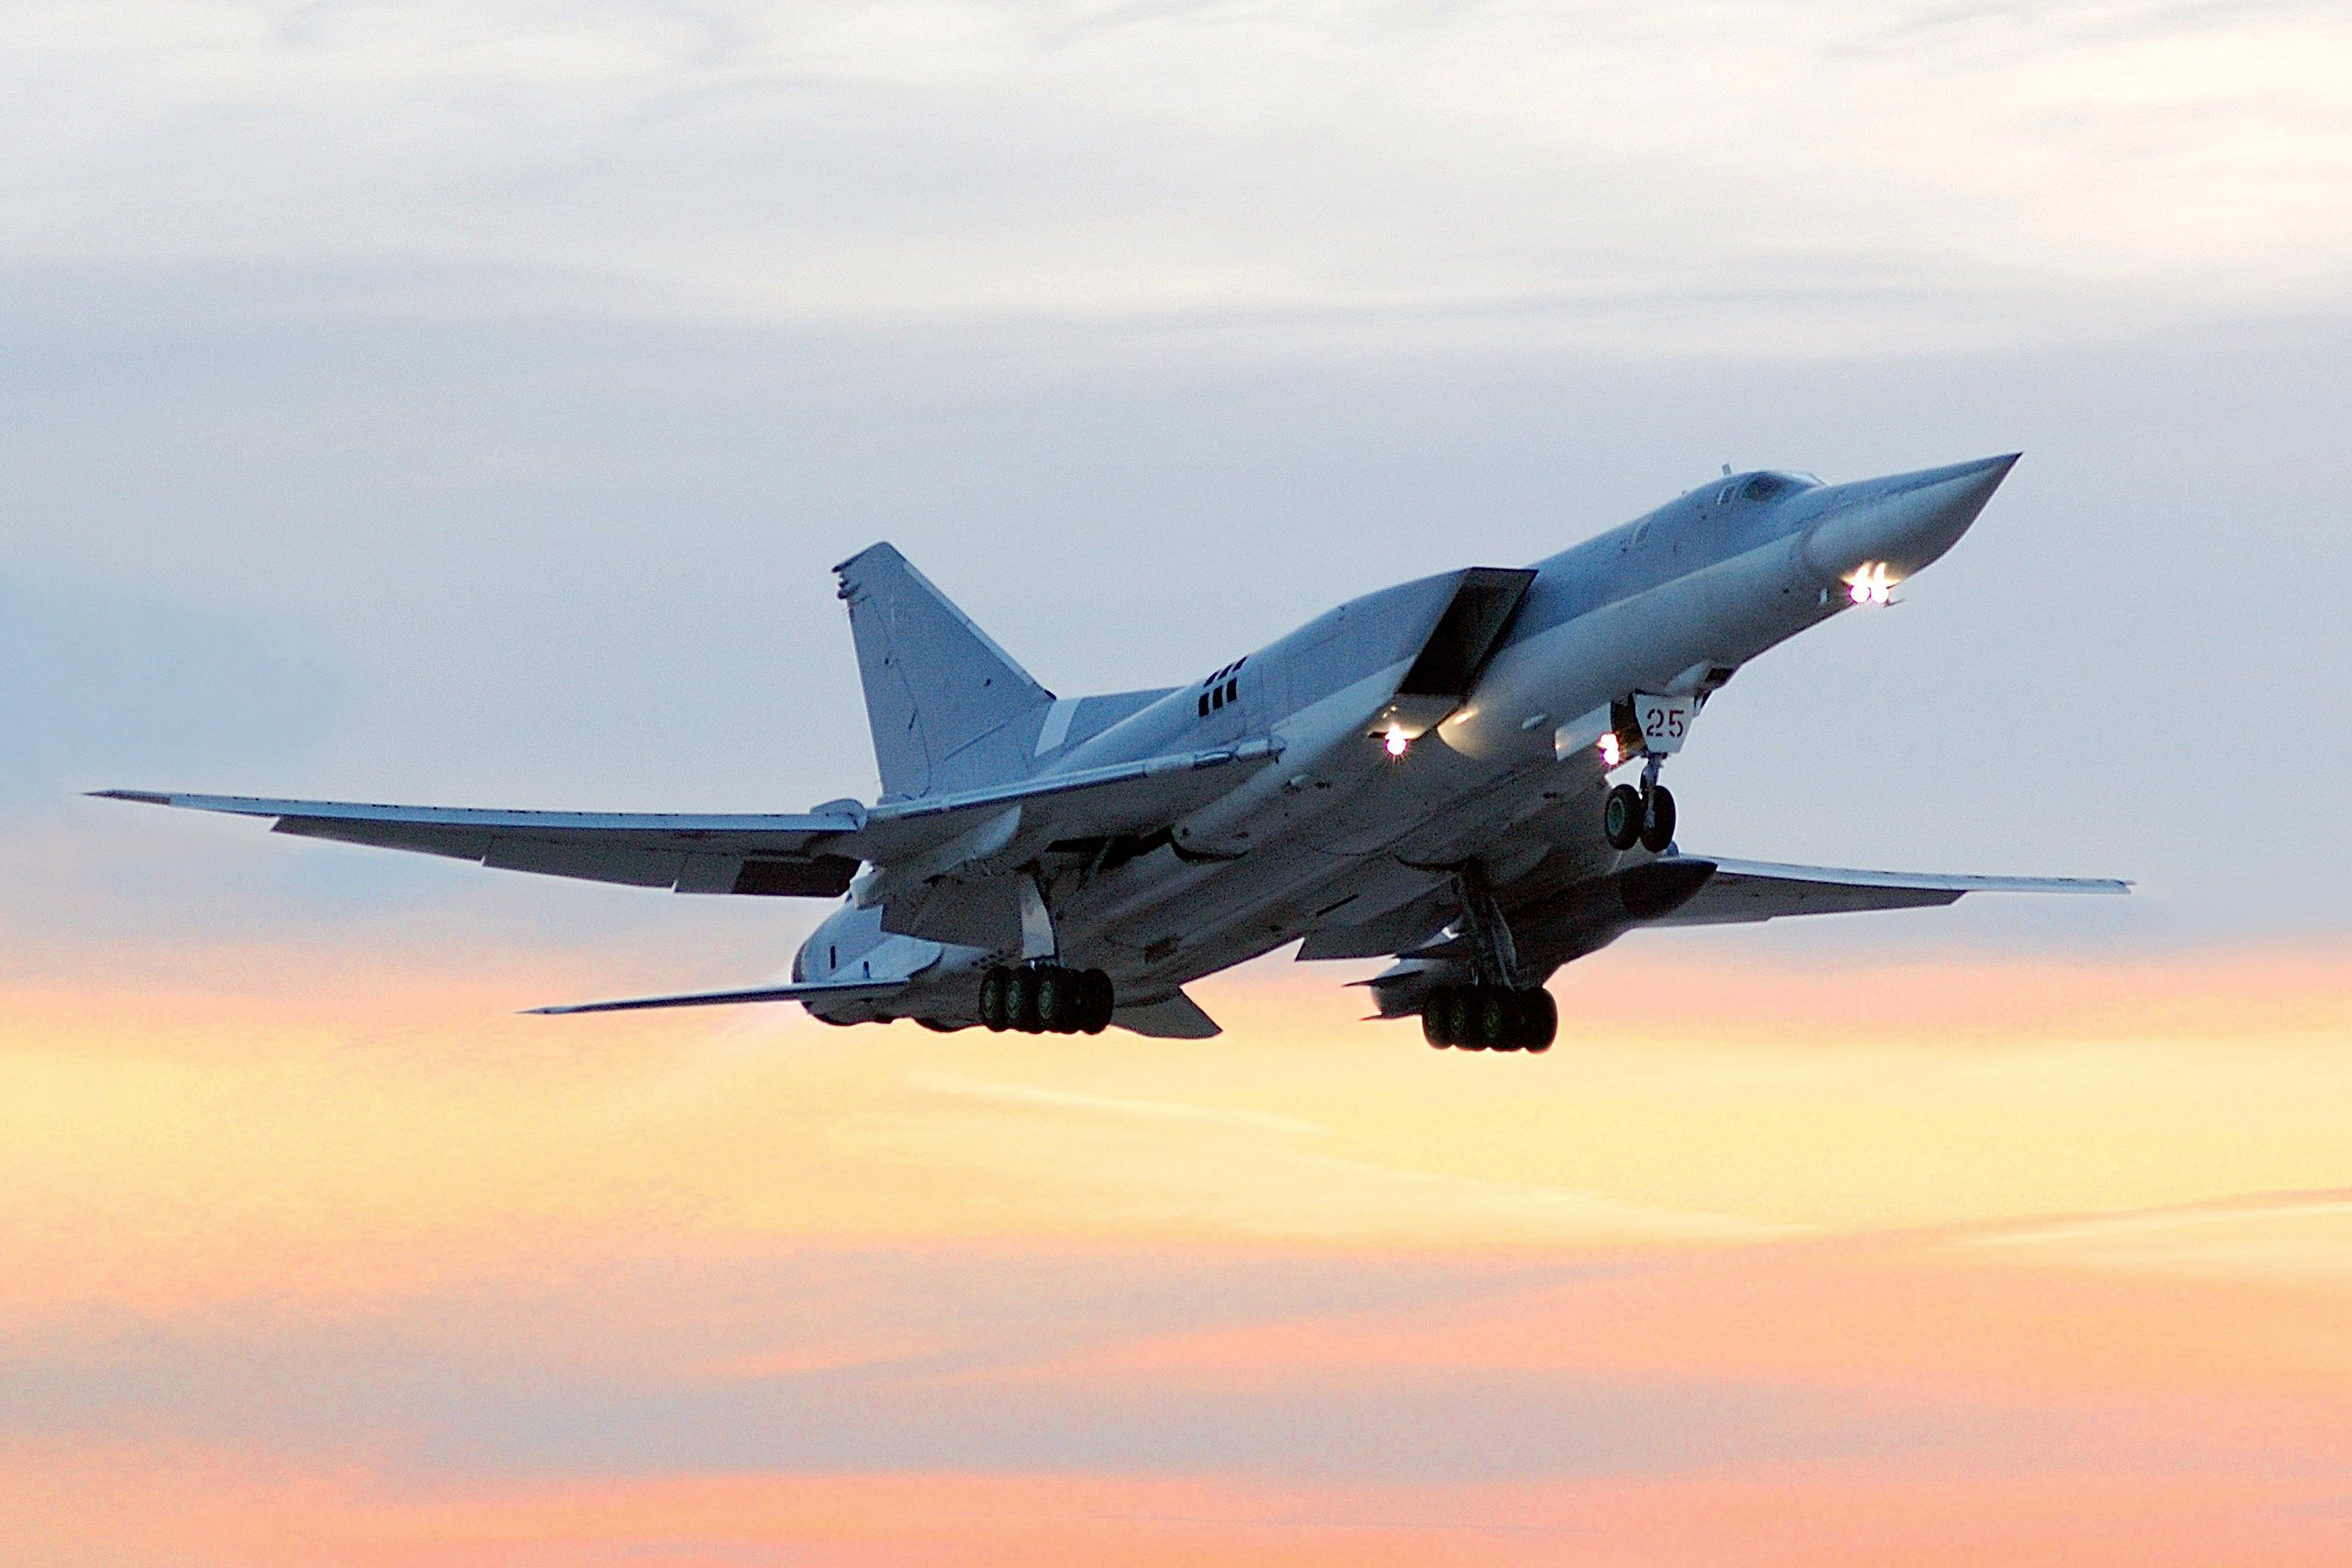 The Tupolev Tu-22, a supersonic bomber, flying over the Engels Air Force base, Saratov Region.